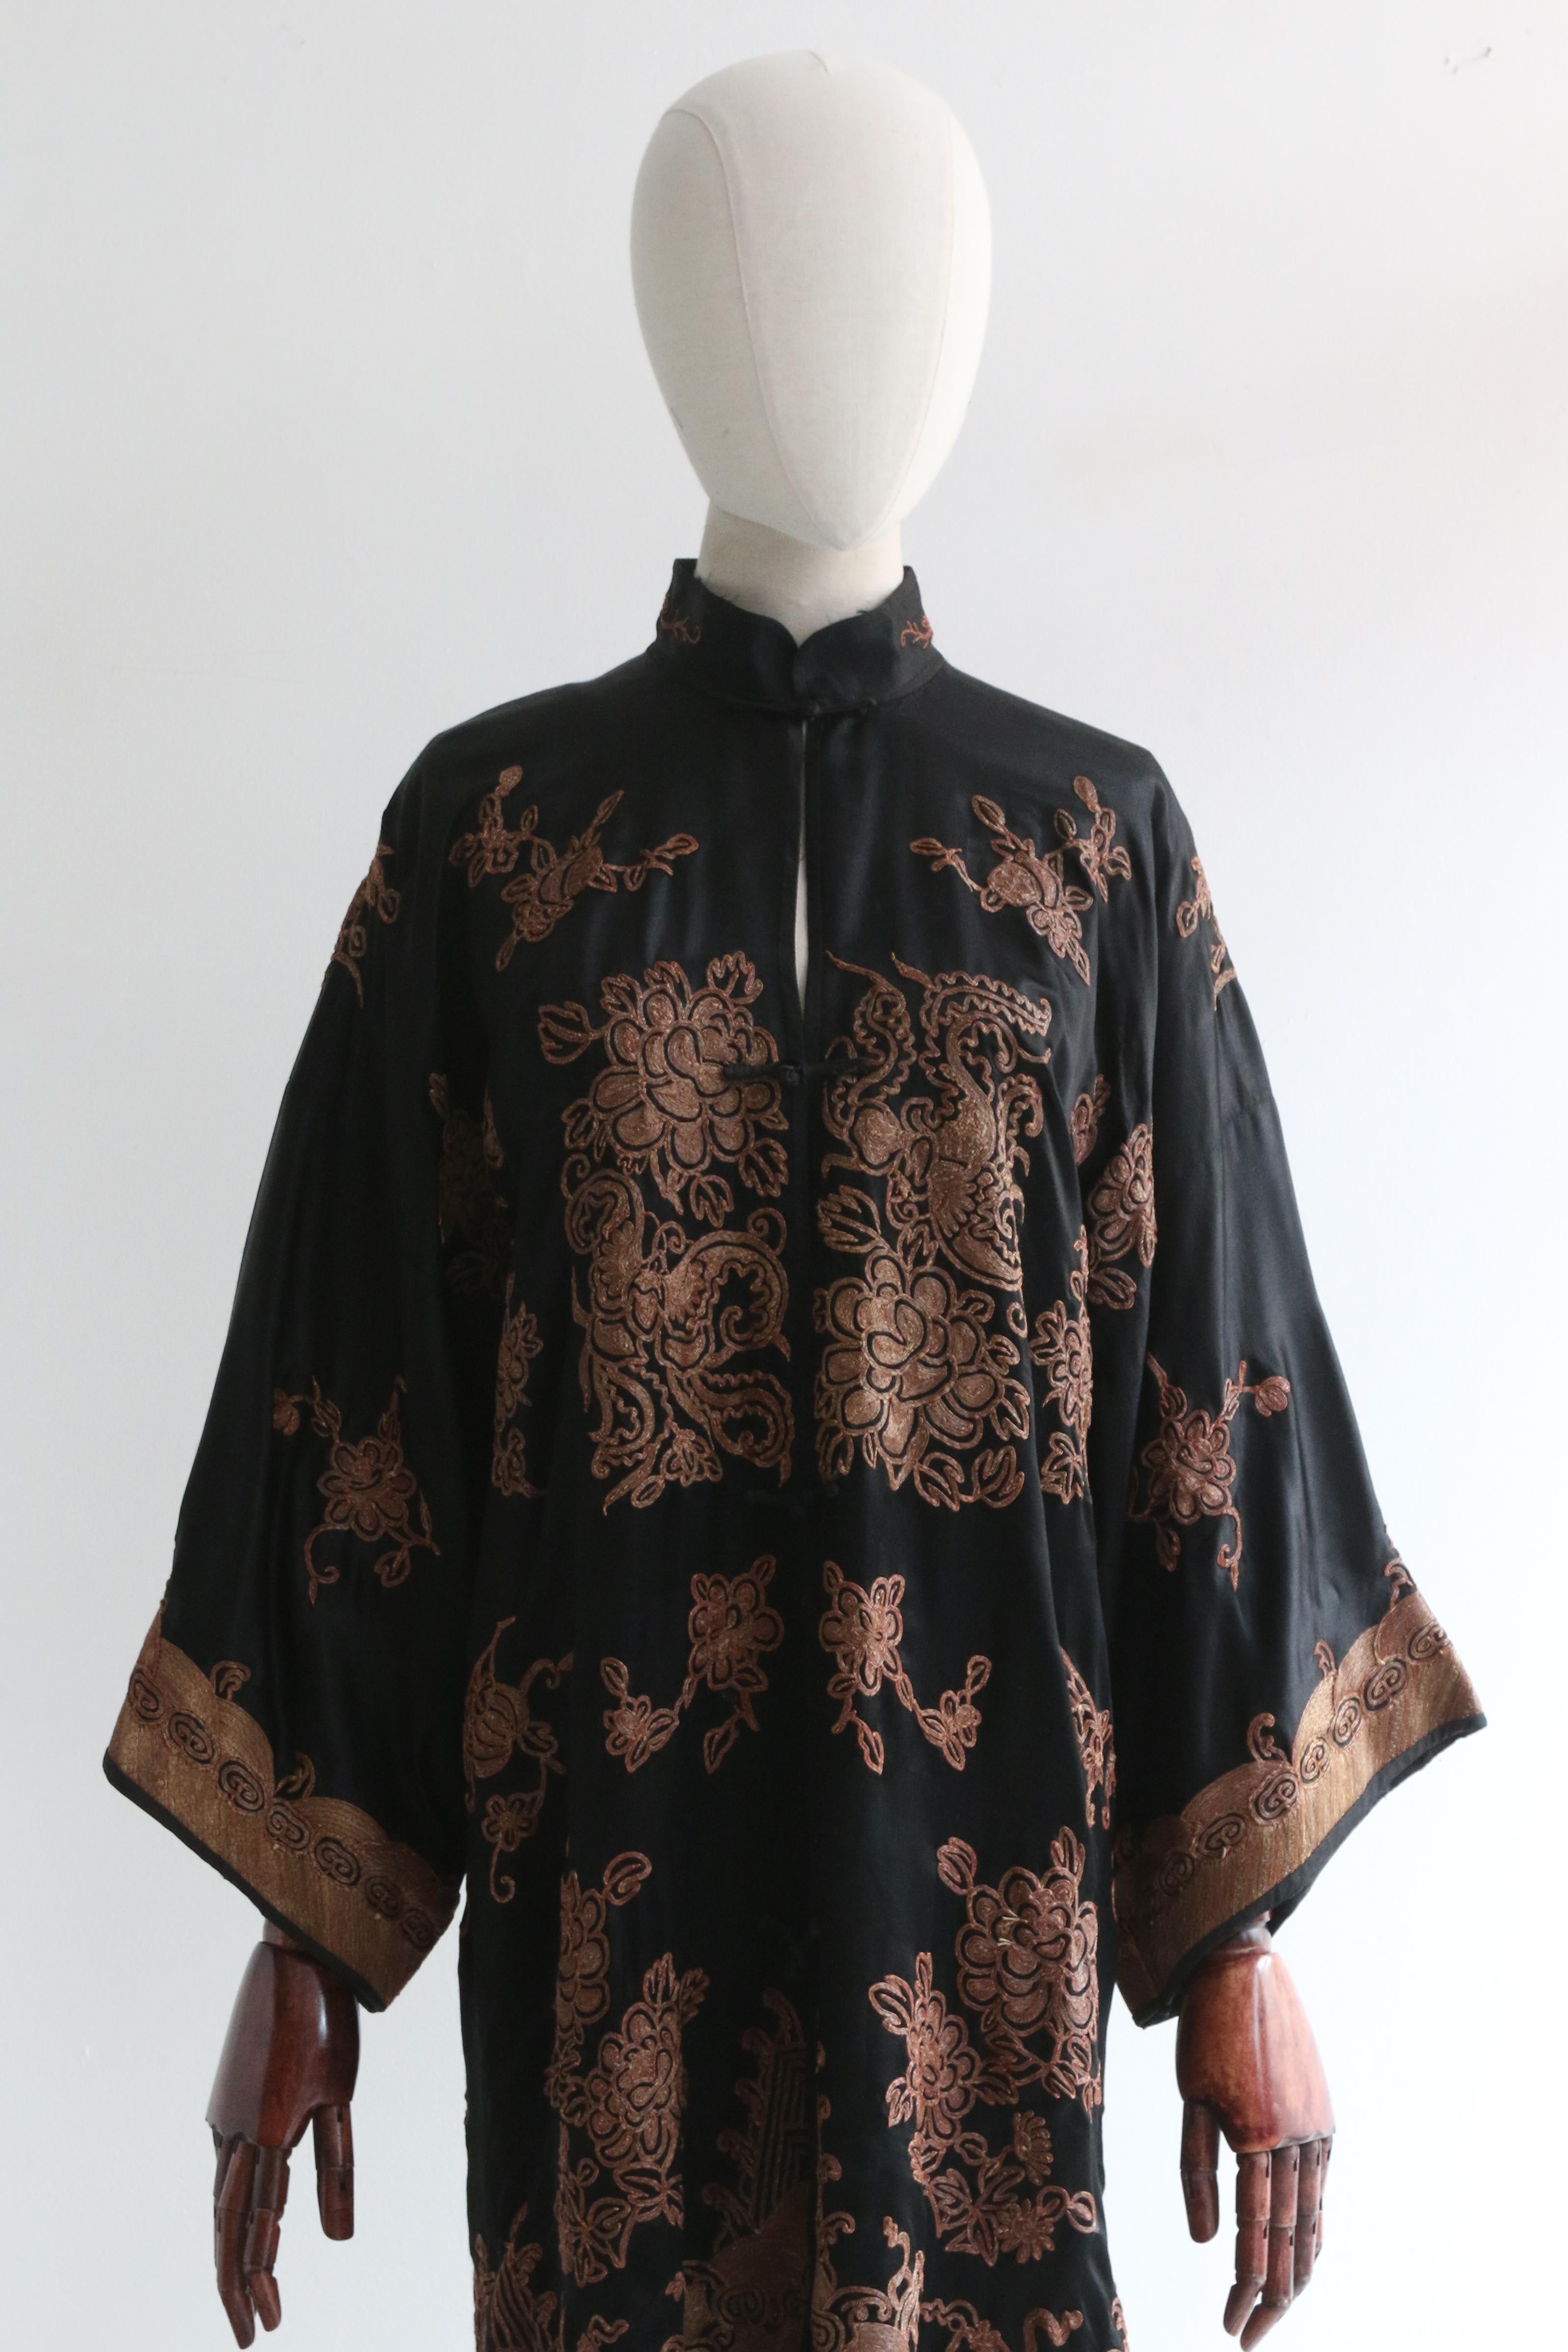 This original 1920's black silk jacket, embellished with gold metal thread embroidery and terracotta thread accents, in a wonderful floral and geometric pattern, is a rare piece to behold and the perfect statement piece for your wardrobe. 

The